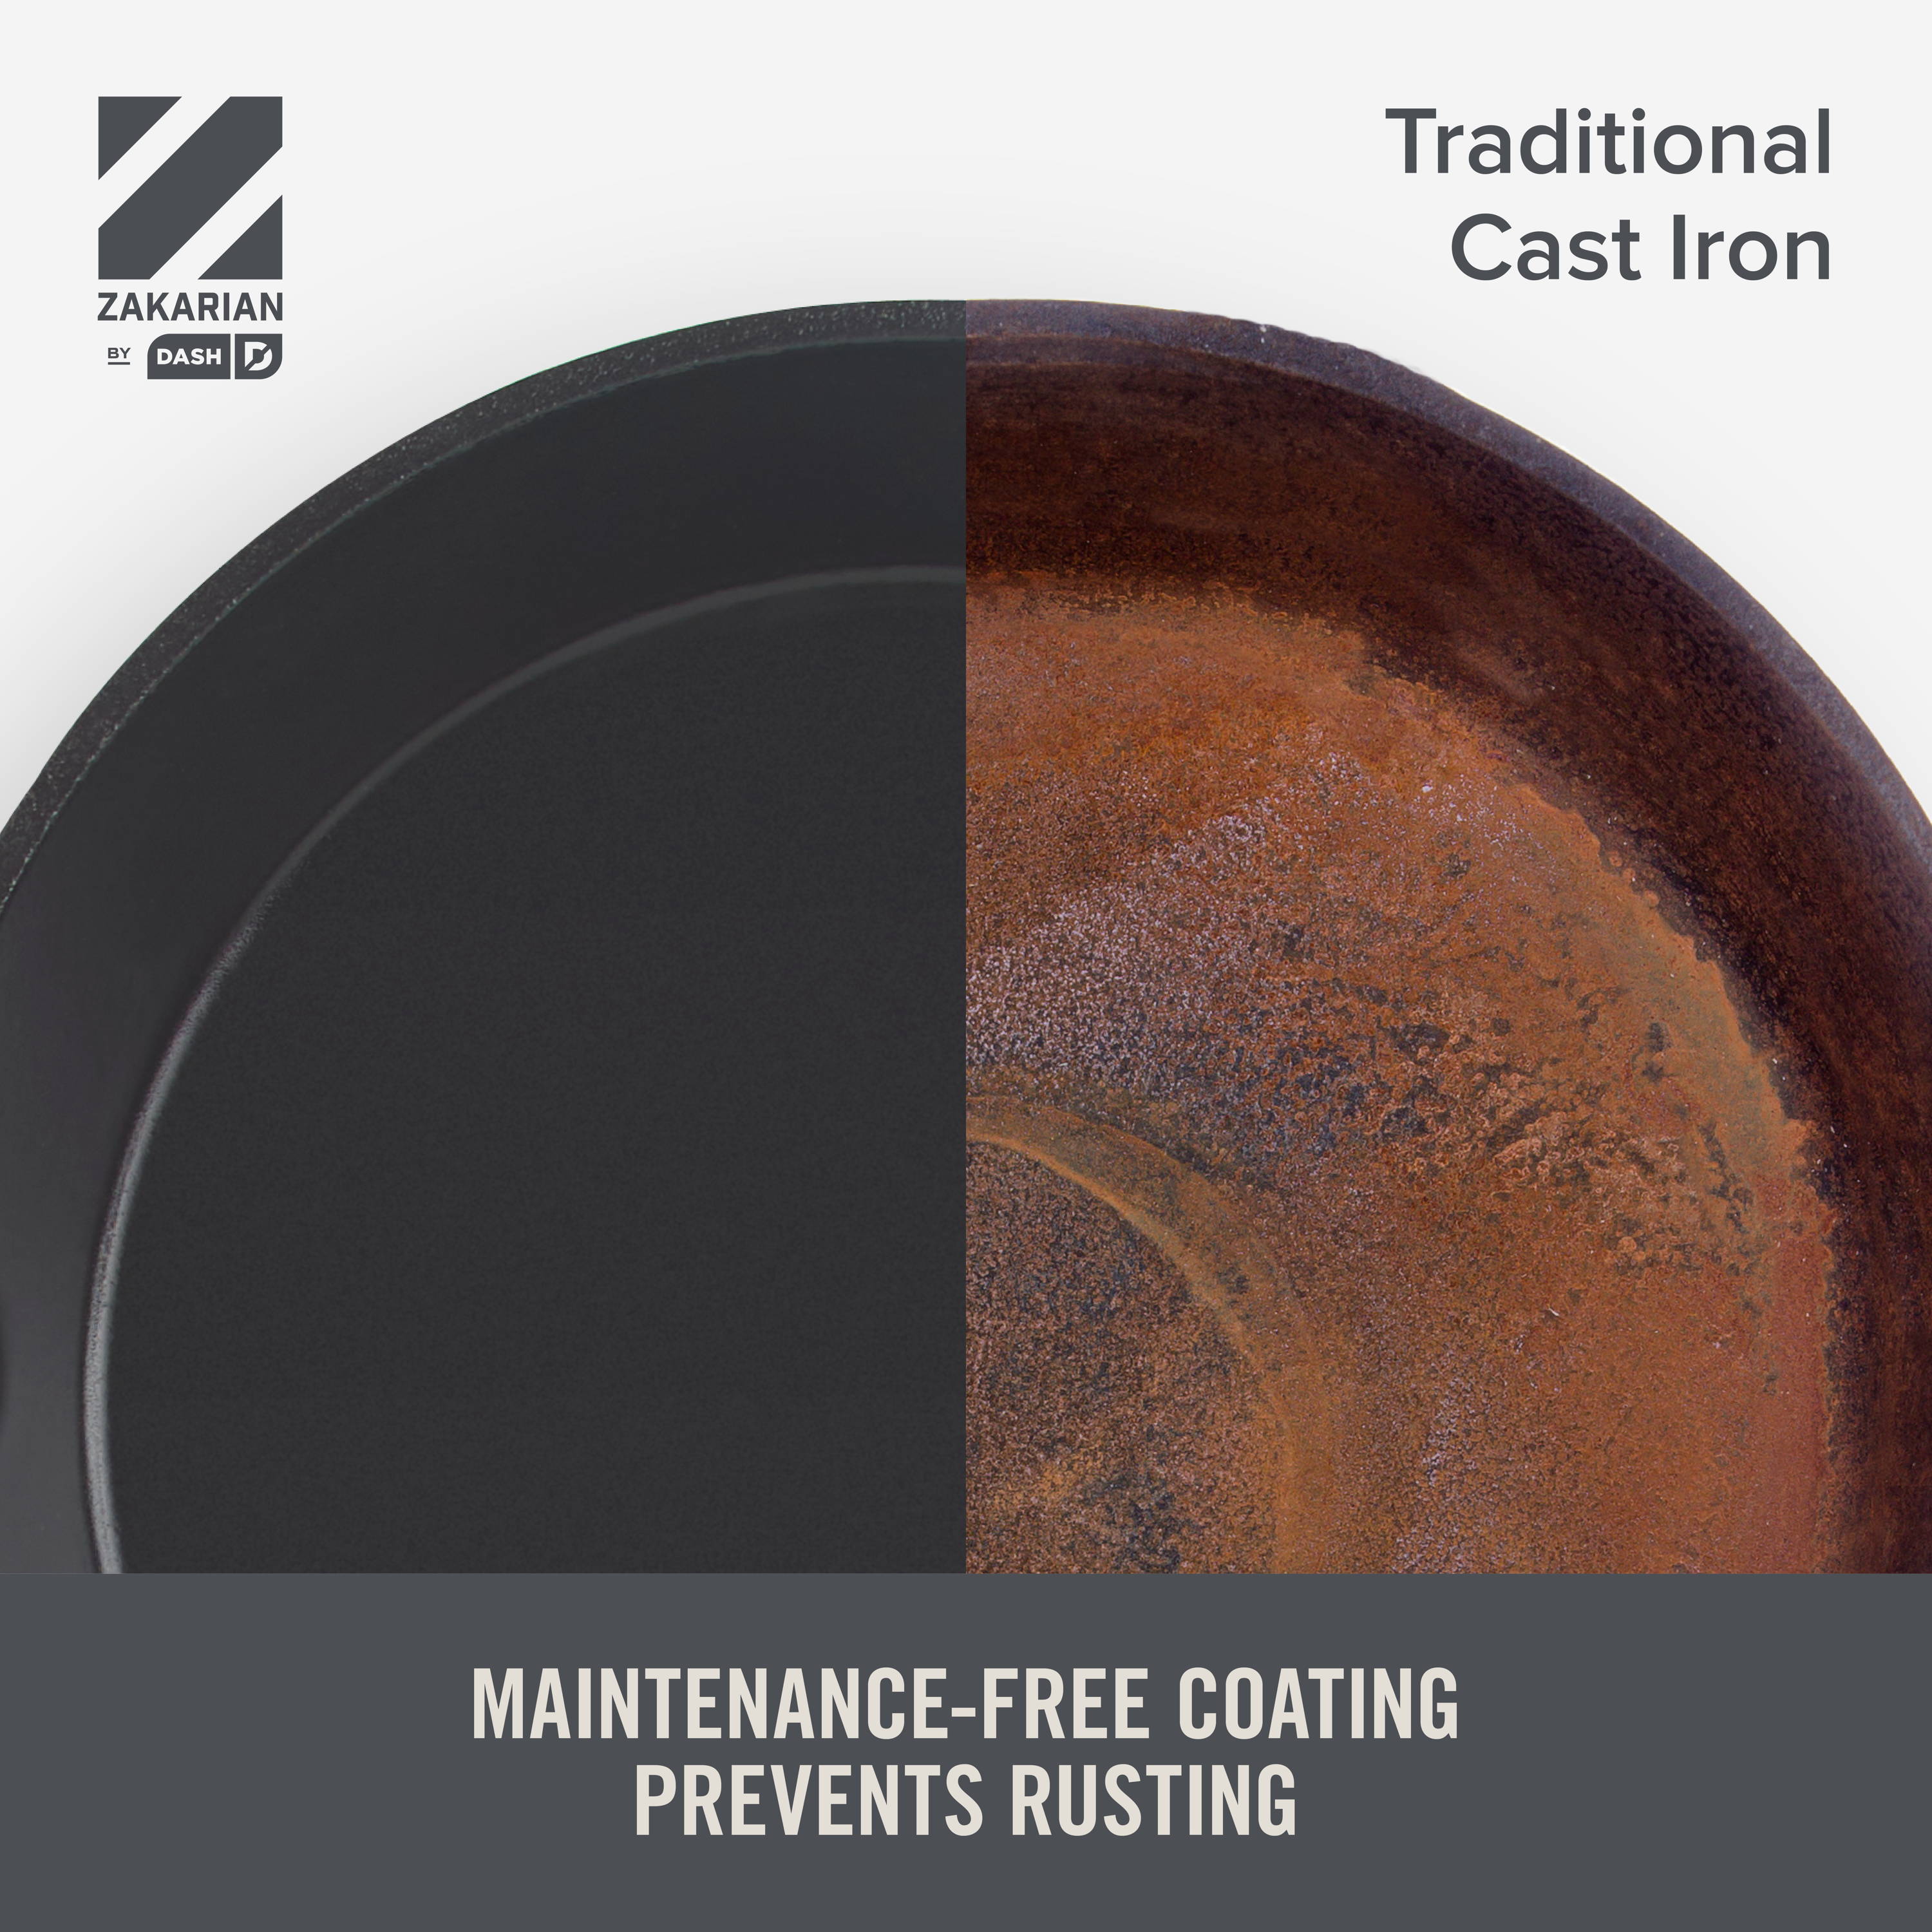 Maintenance-free coating prevents rusting